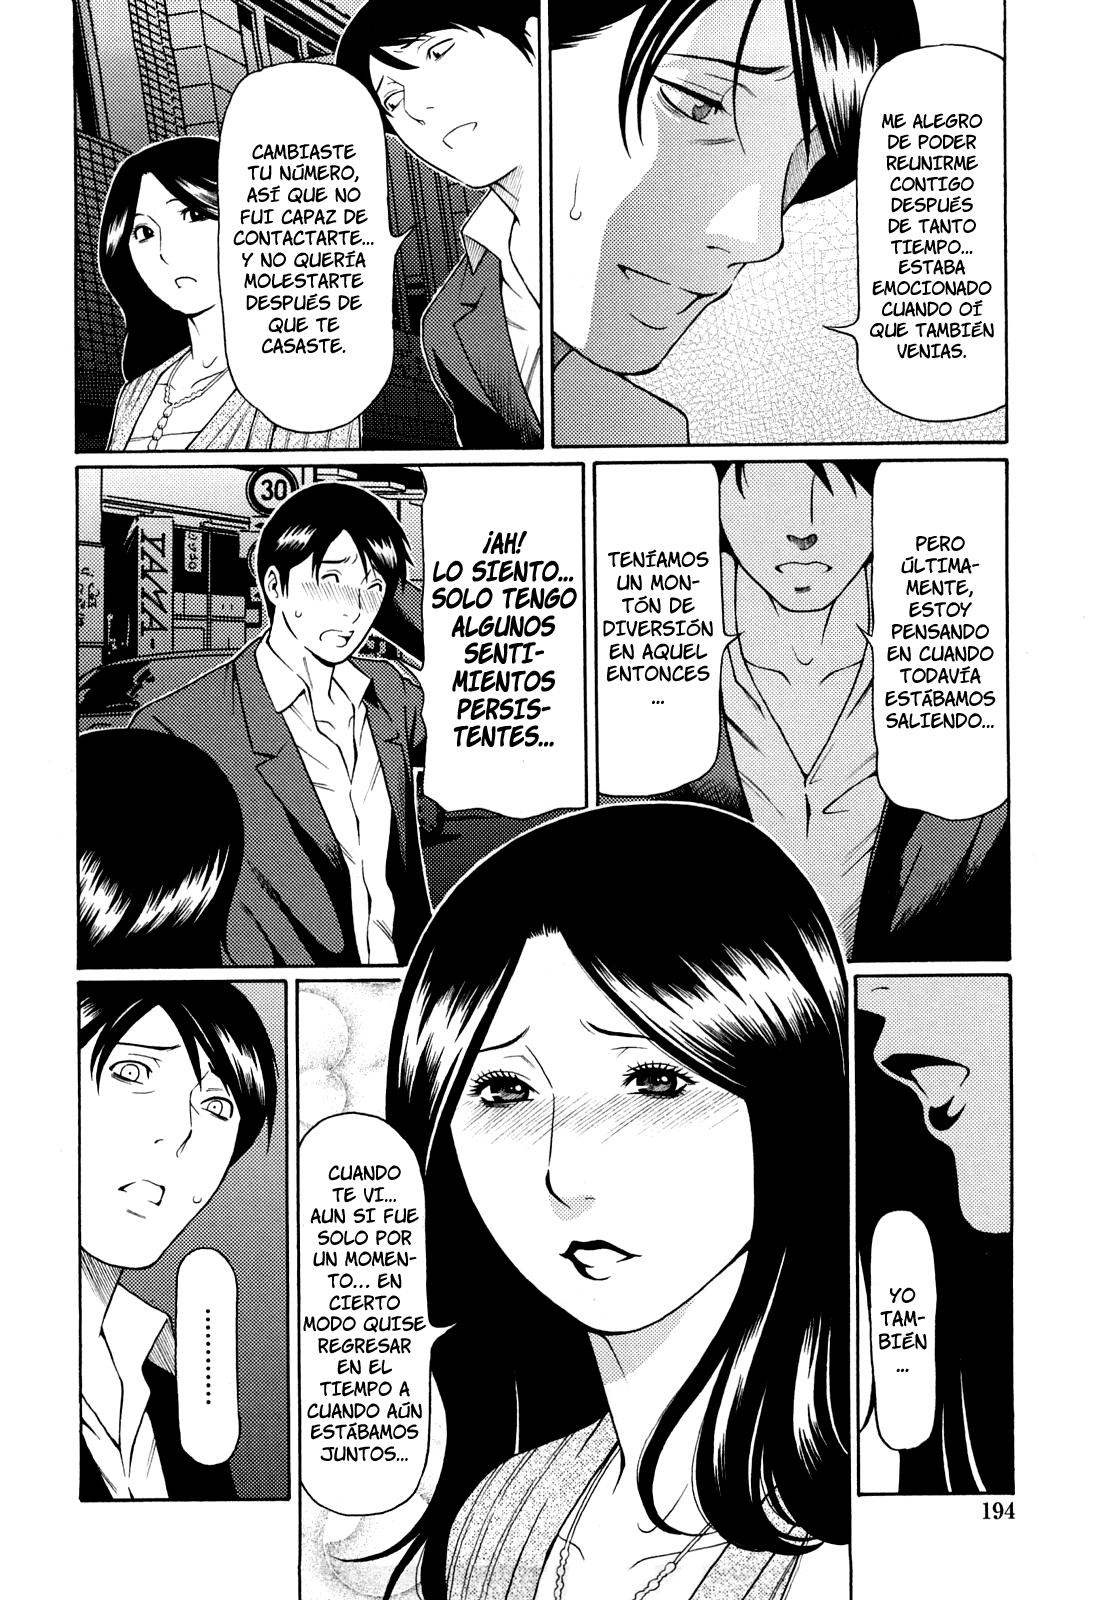 Immorality Love-Hole Completo (Sin Censura) Chapter-12 - 3